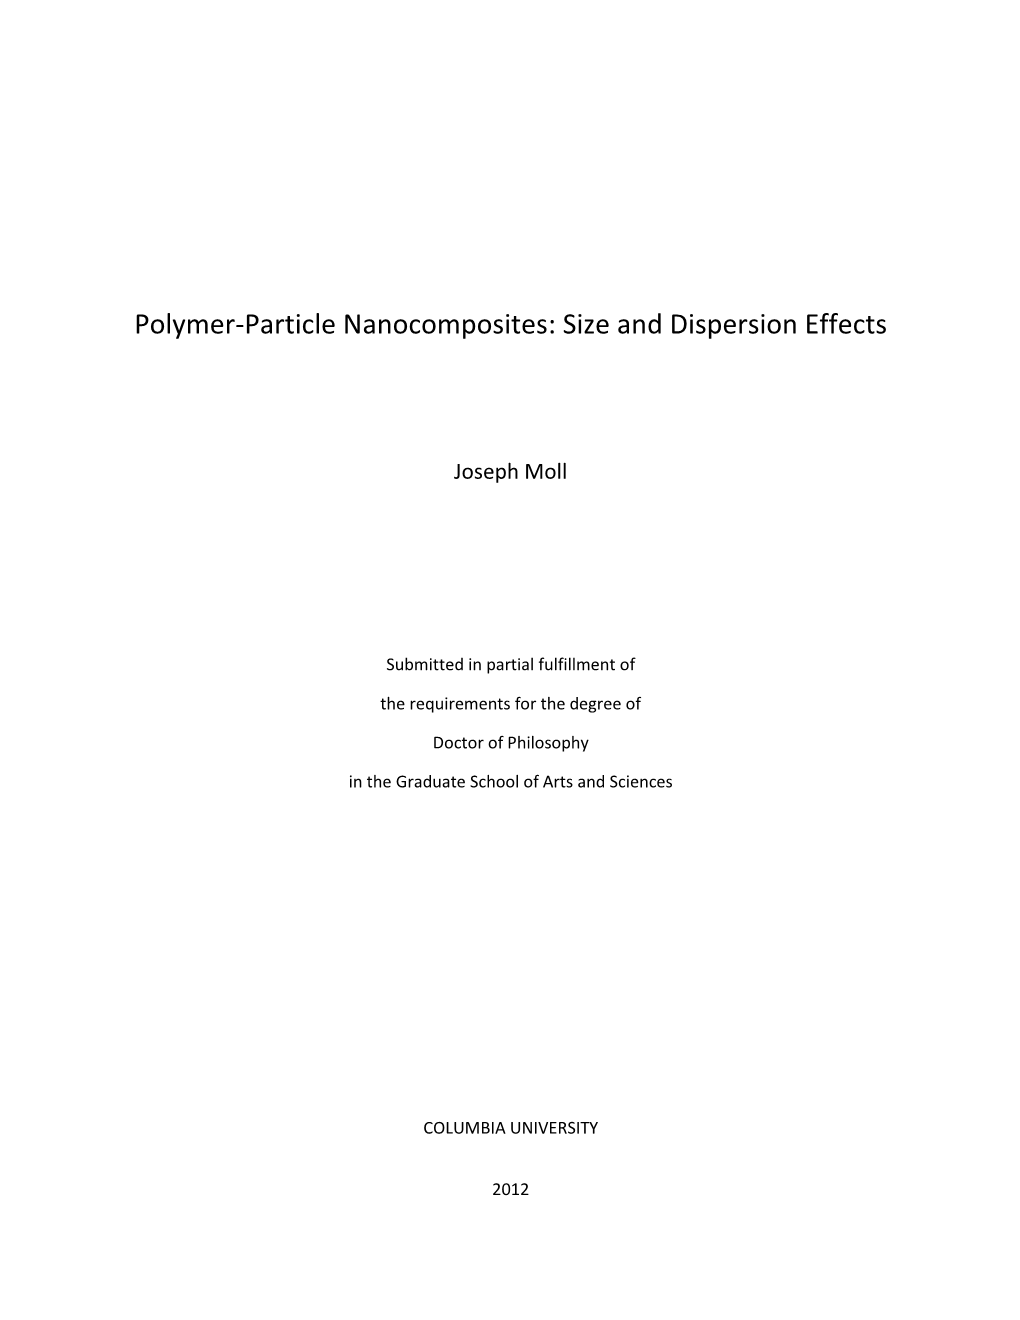 Polymer-Particle Nanocomposites: Size and Dispersion Effects